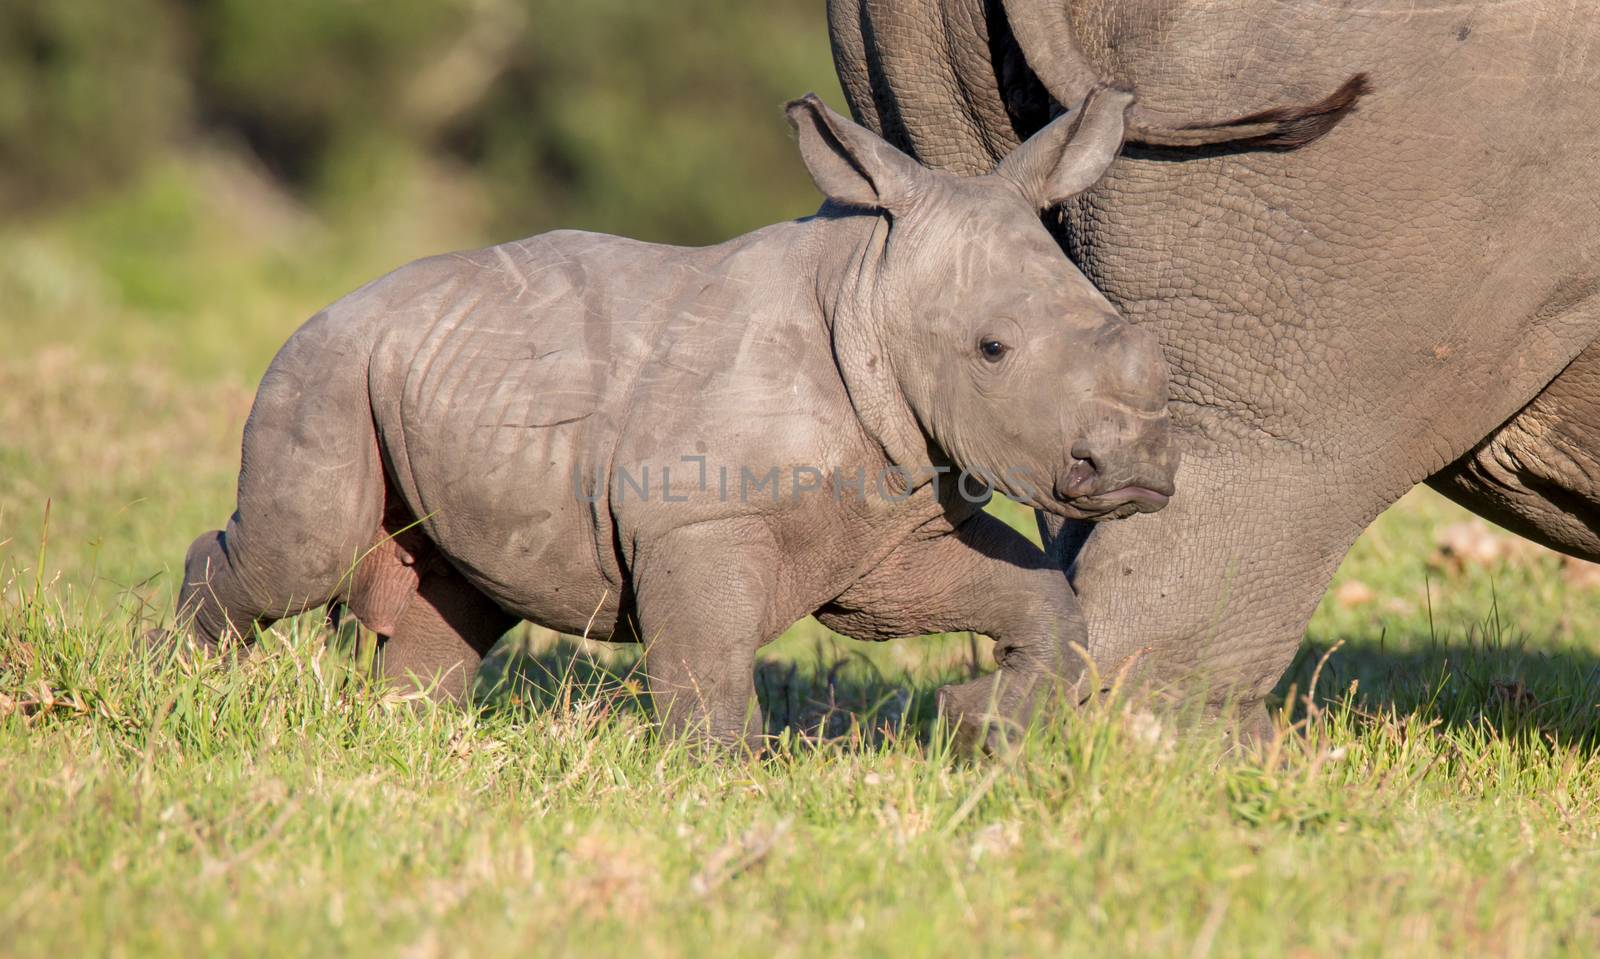 Cute baby white rhinoceros running next to it's mother